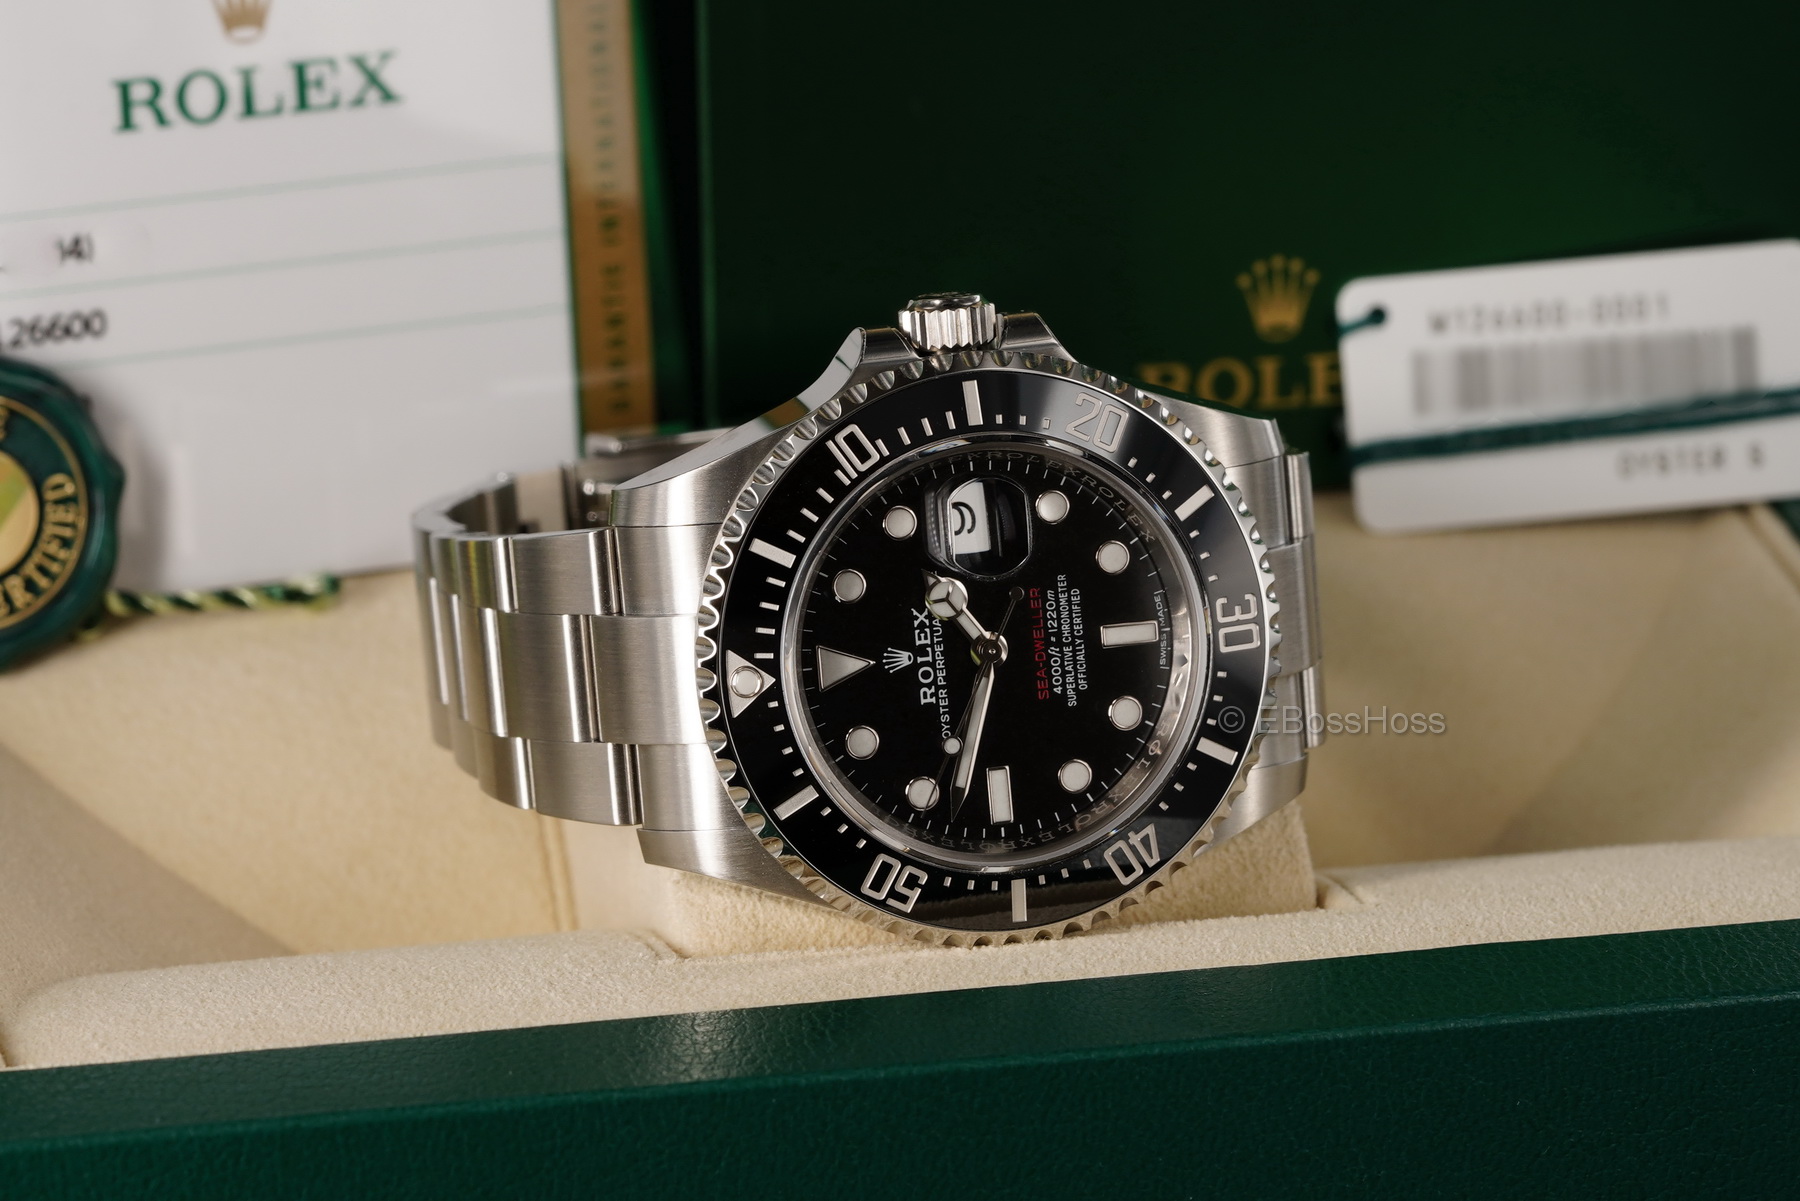  Rolex 43mm Red Reference SEA-DWELLER -126600